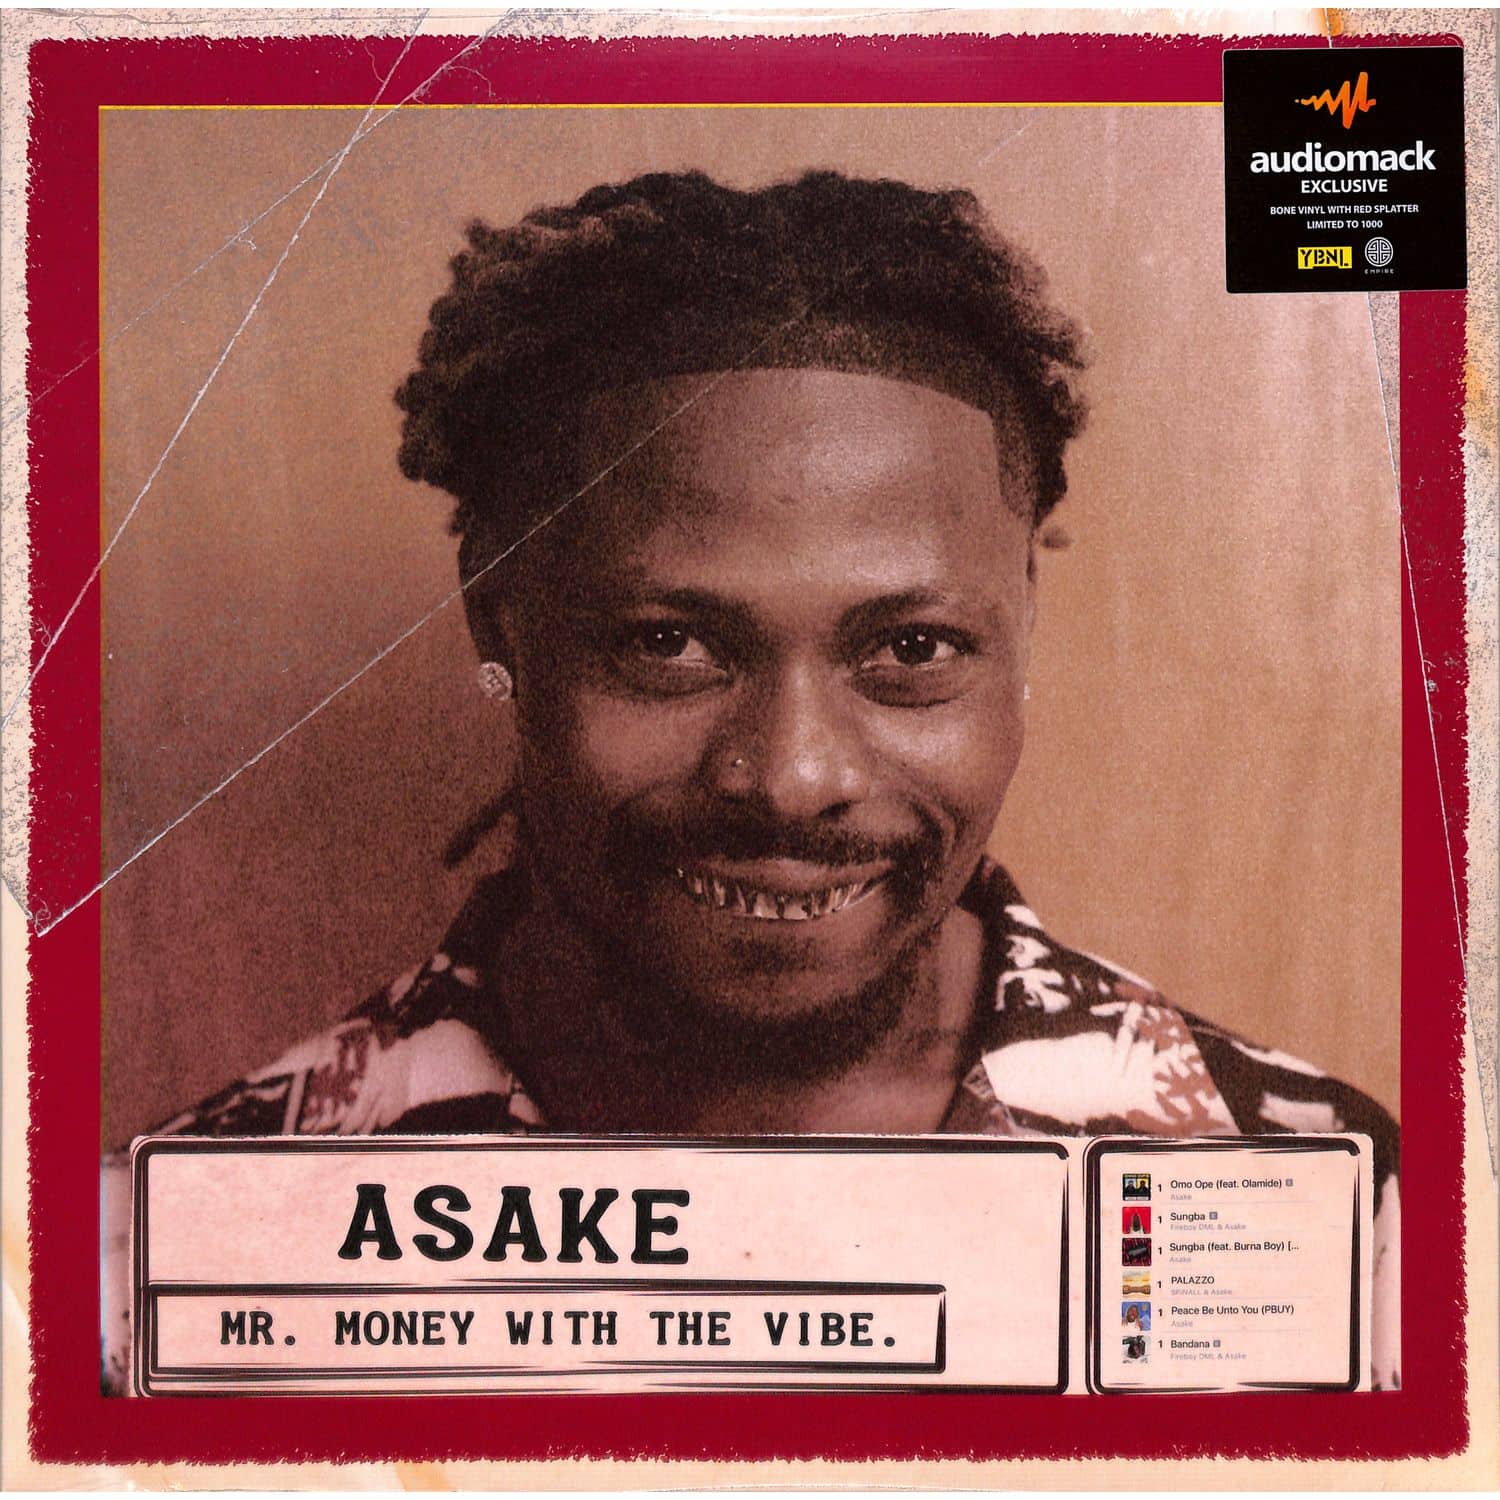 Asake - MR. MONEY WITH THE VIBE 